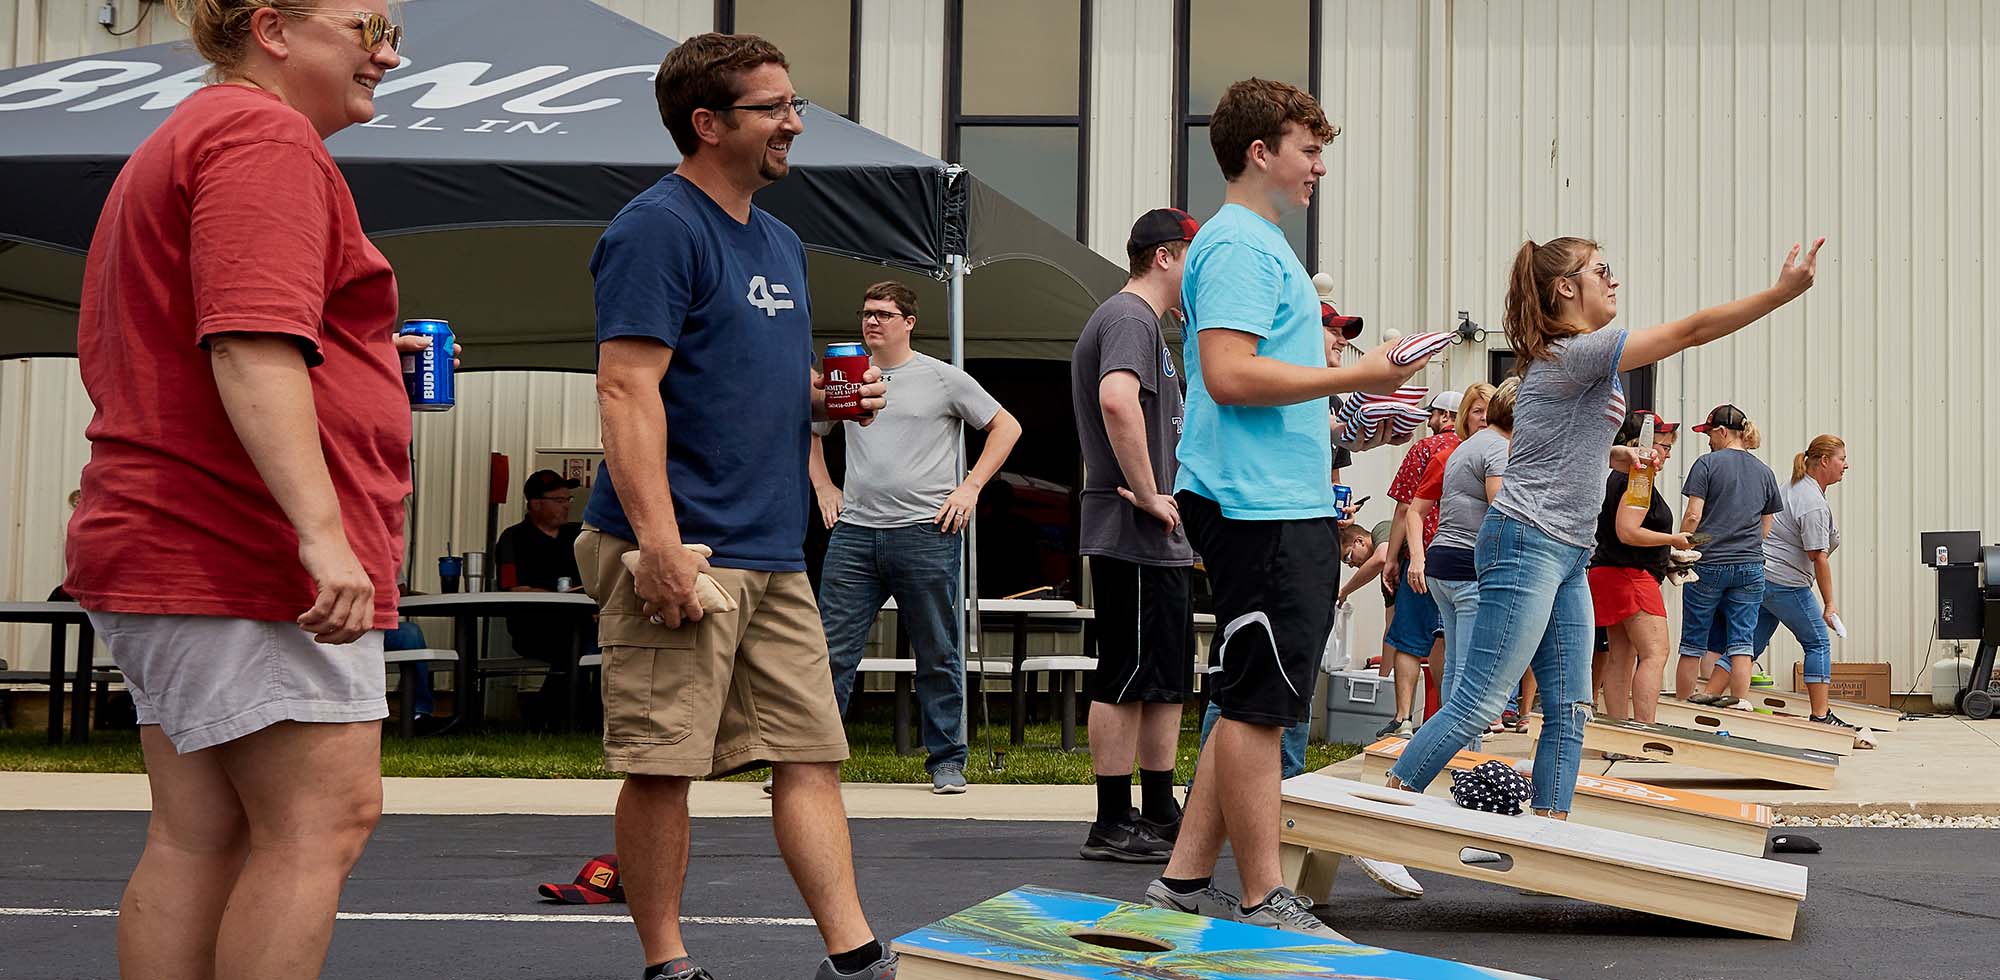 Cornhole Tournaments  Find and Compete in Local Cornhole Competitions